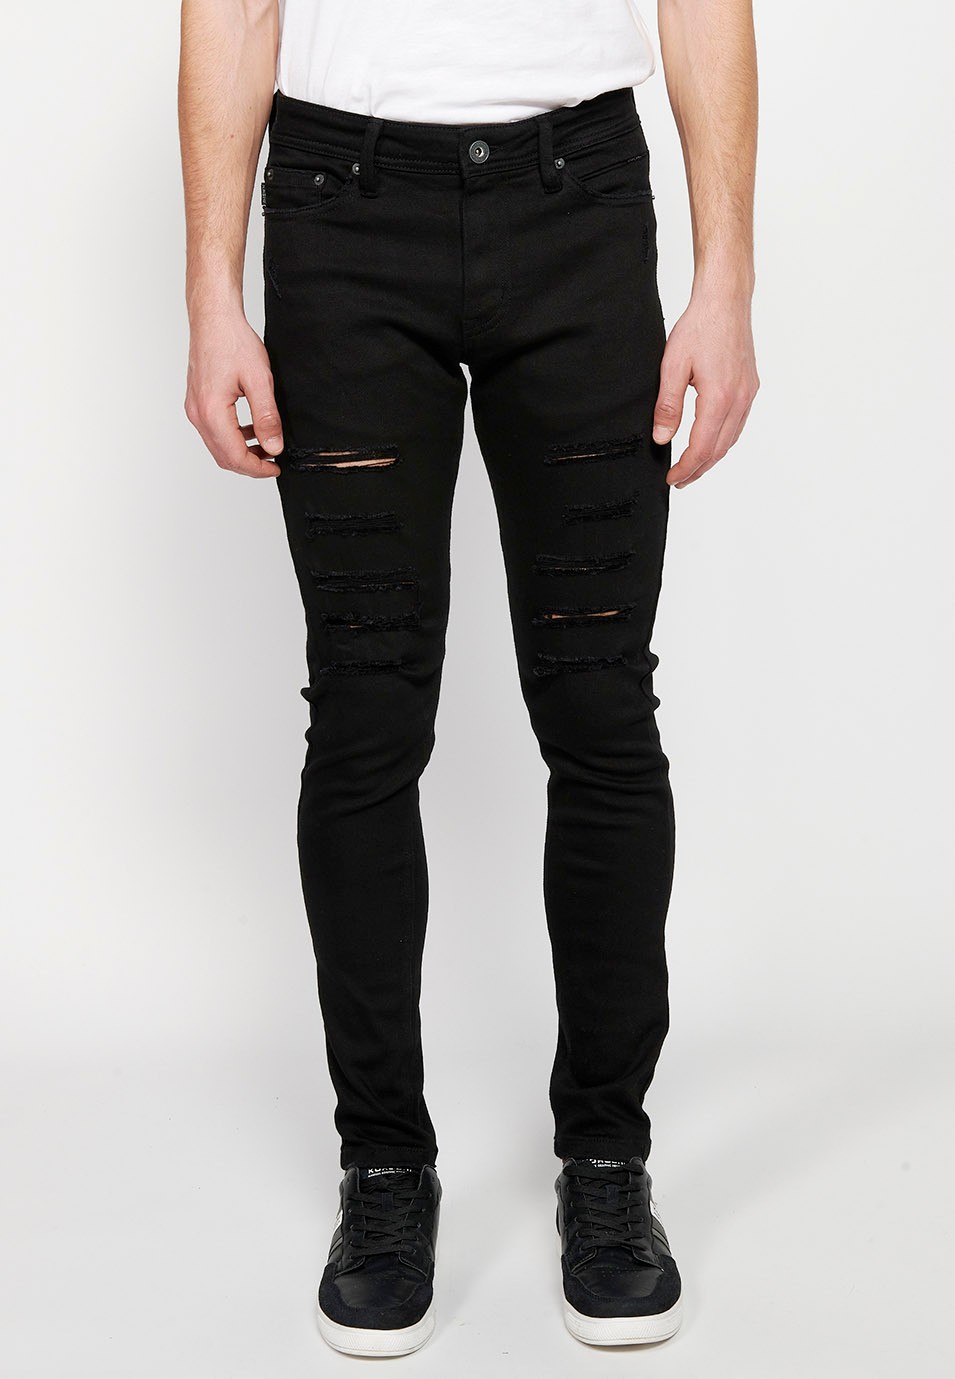 Long slim super skinny jeans with front closure with zipper and button in Black Denim Color for Men 3